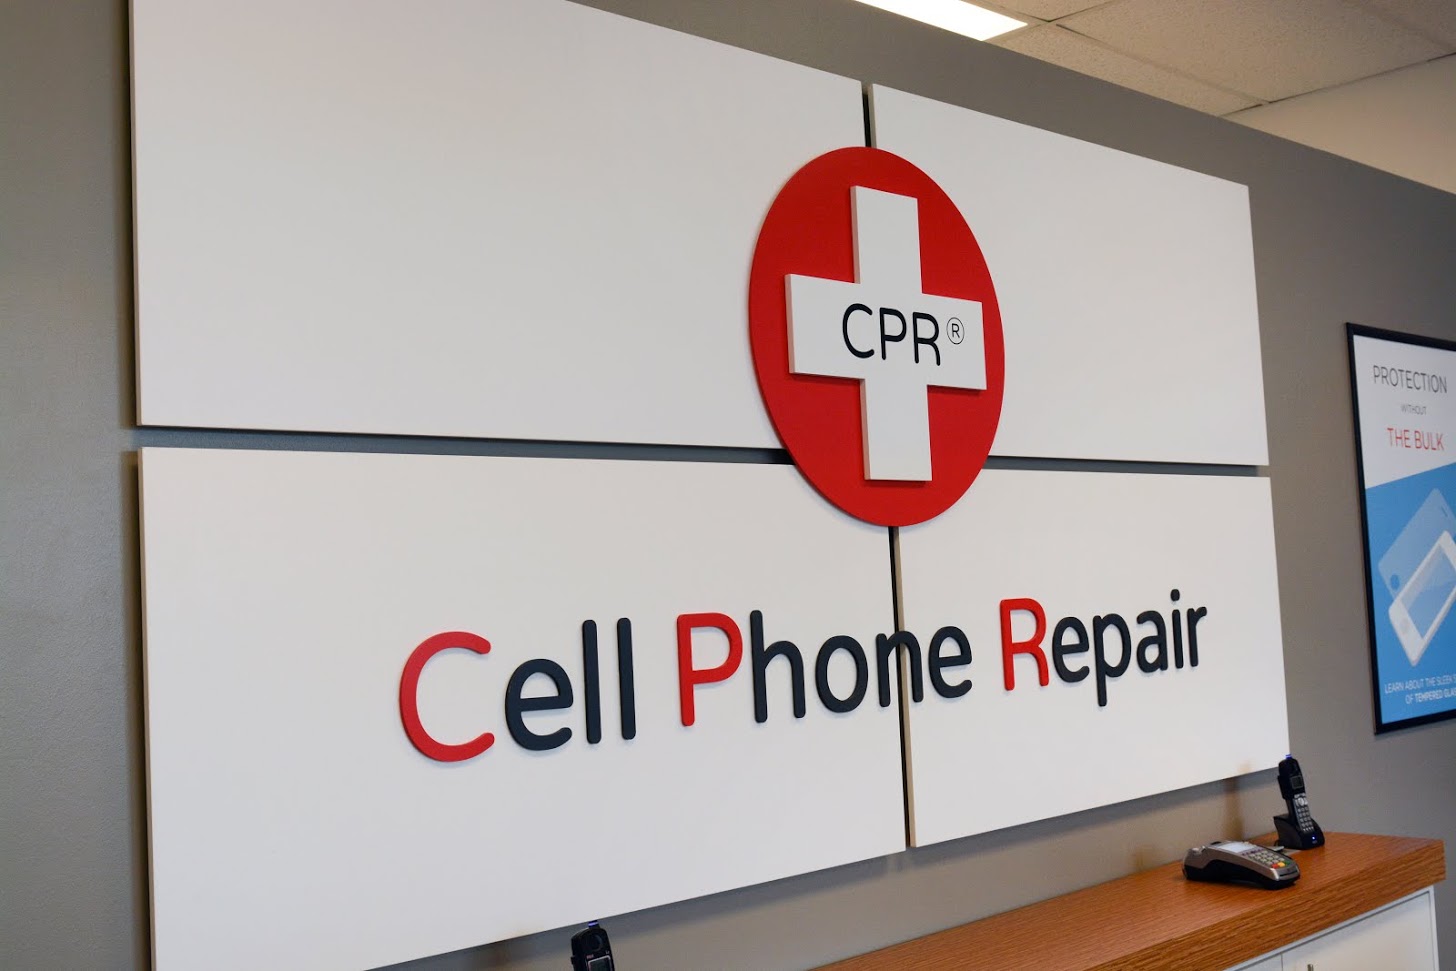 CPR Cell Phone Repair, Monday, February 18, 2019, Press release picture